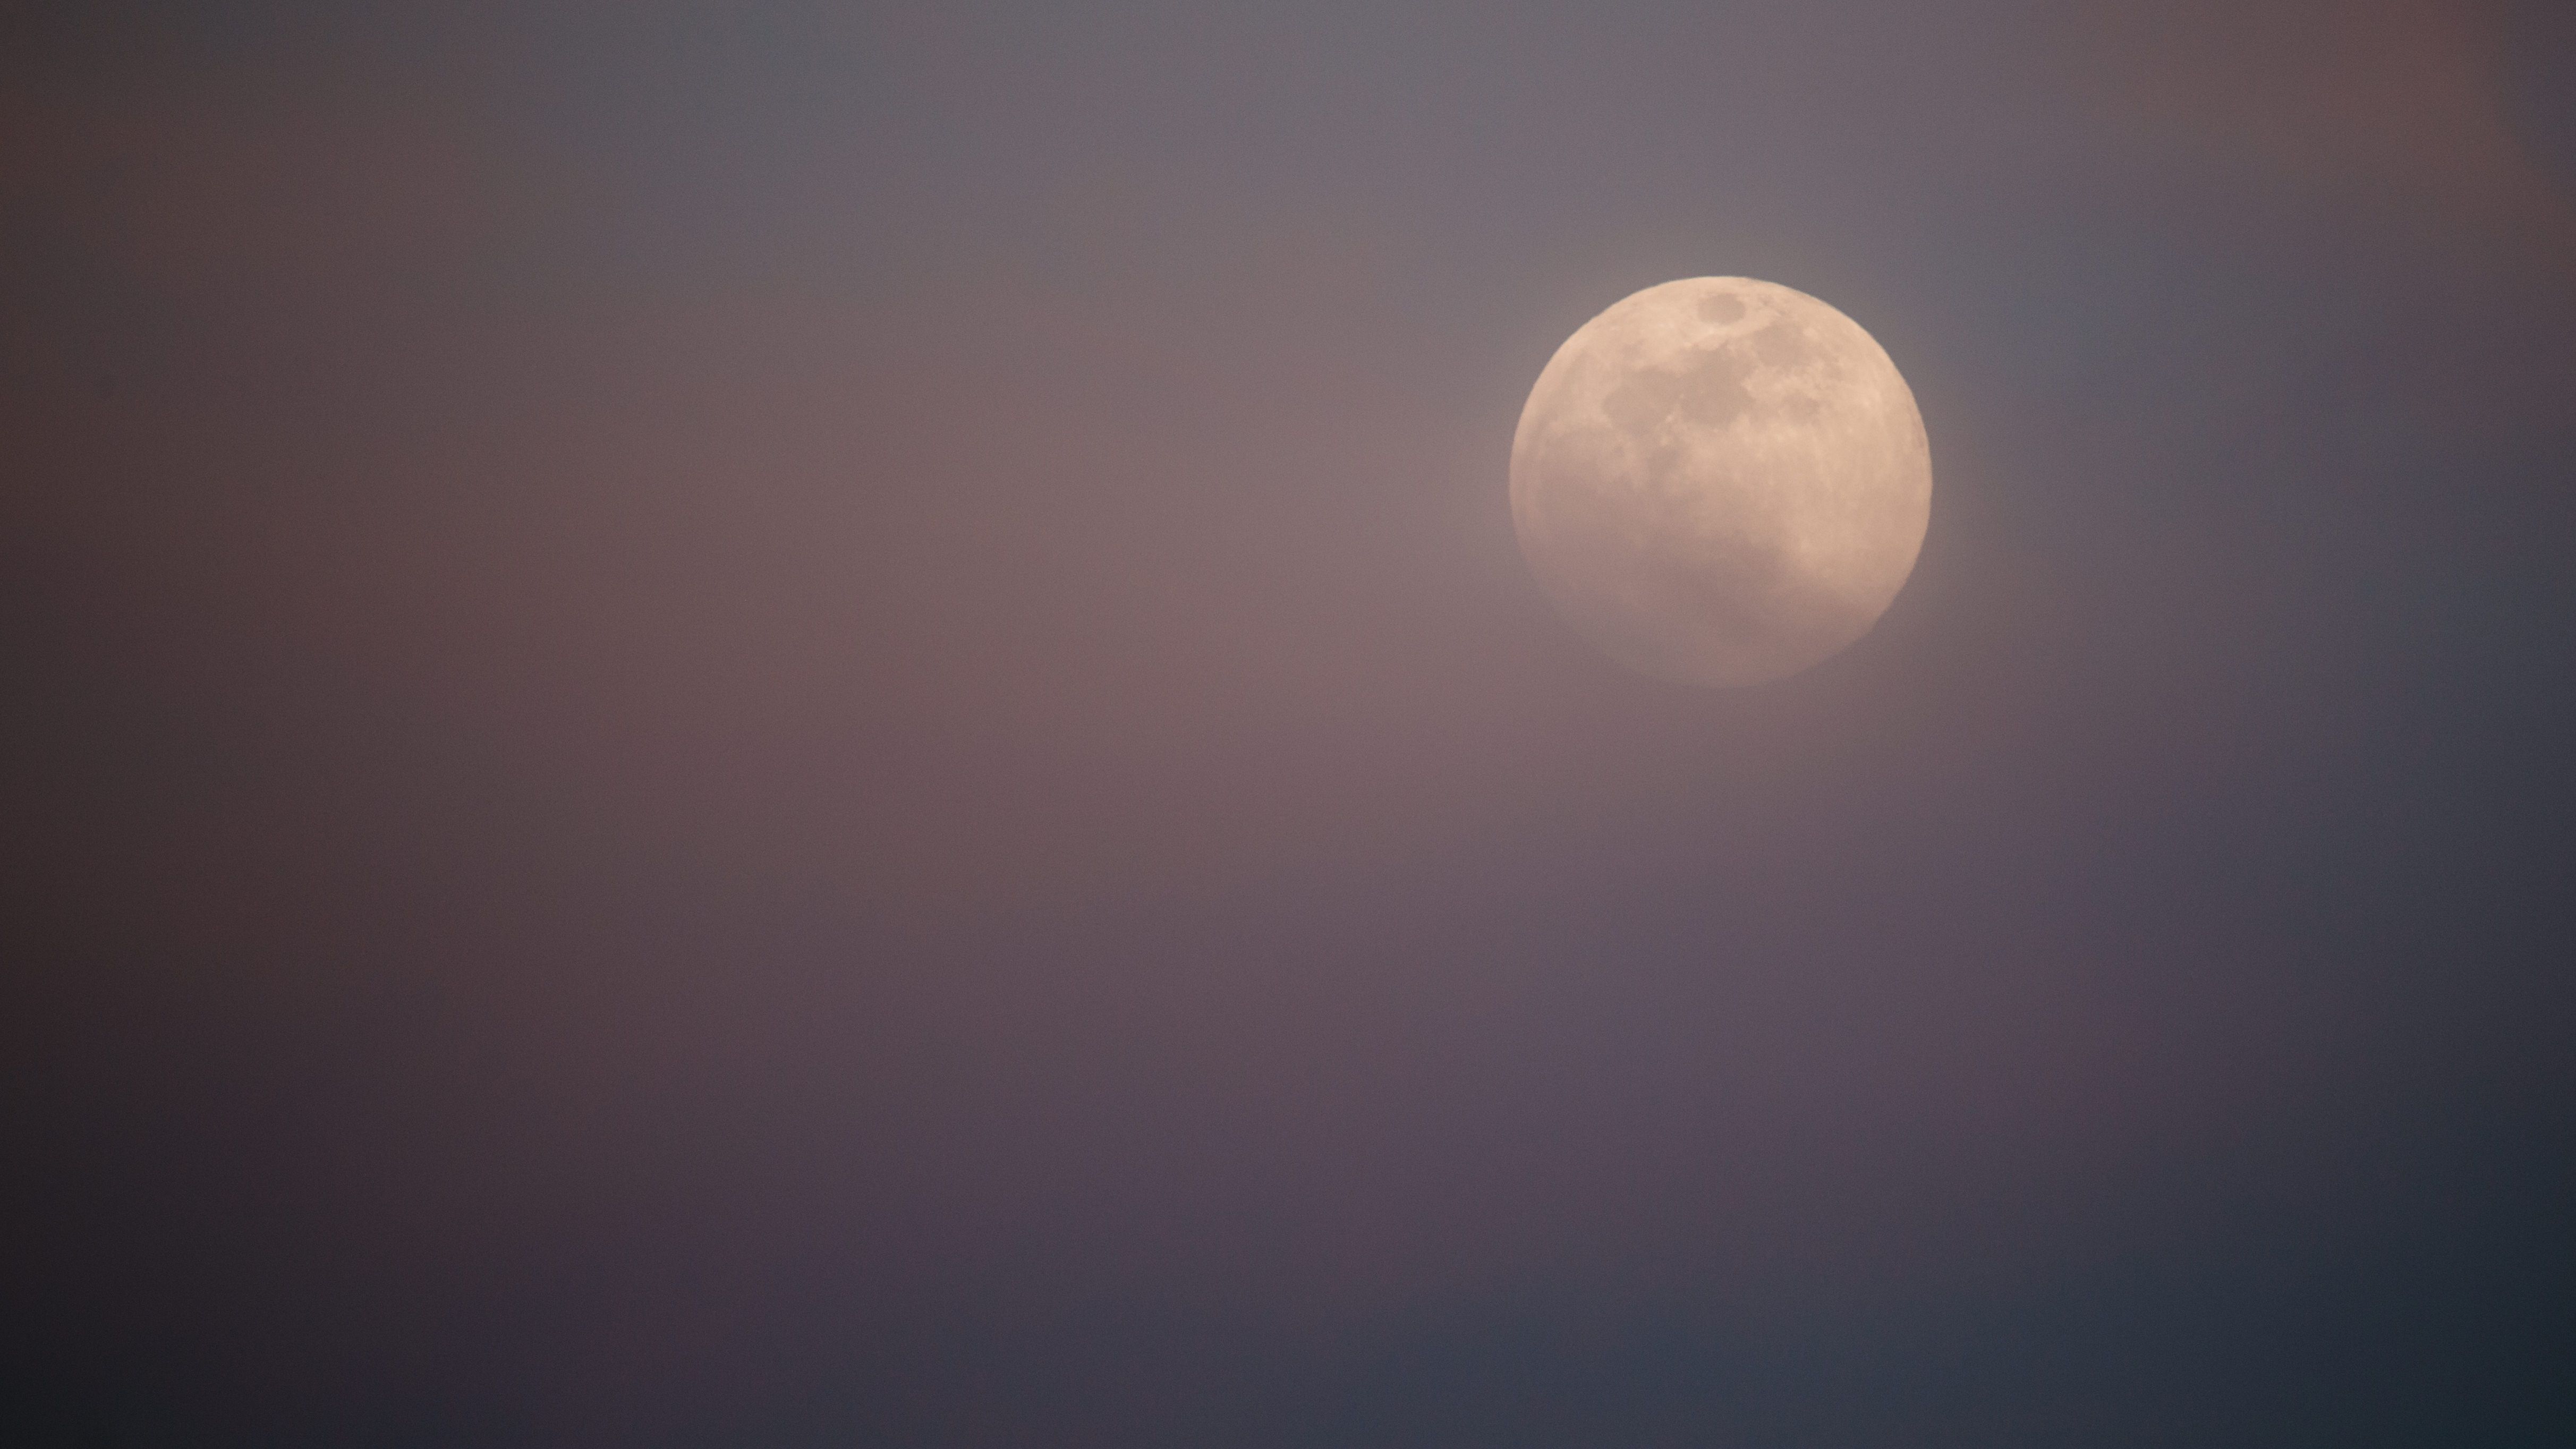 4849x2728 #cloud, #moonlight, #Creative Commons image, #pinkmoon, # spring color, #moon, #sky, #canon, #spring, #night, #atmosphere, #full moon, #perfect timing Gallery HD Wallpaper